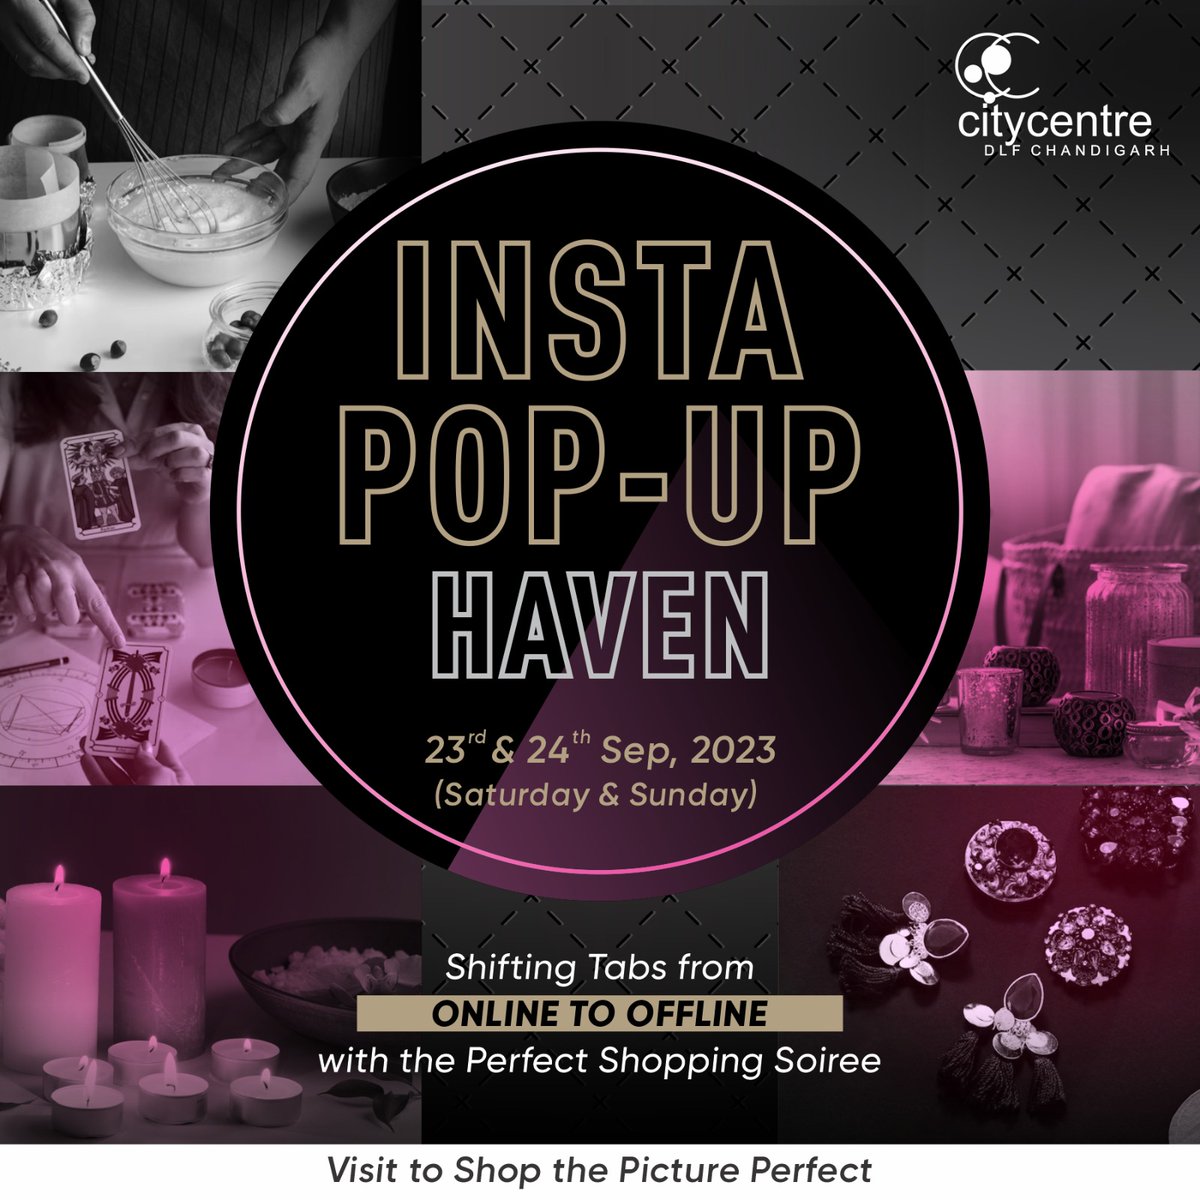 Love❤️Shop🛍️Share➤ Explore your #FavoriteFeed & Indulge over the Trendy & Exclusive #InstagramShops in #OFFLINEMODE with #INSTAPOPUPHAVEN at #DLFCityCentreMall on Saturday & Sunday, 23rd & 24th Sep, 2023. 📍DLF CityCentre Mall, IT Park, Chandigarh #ShoppingSoiree #PicturePerfect